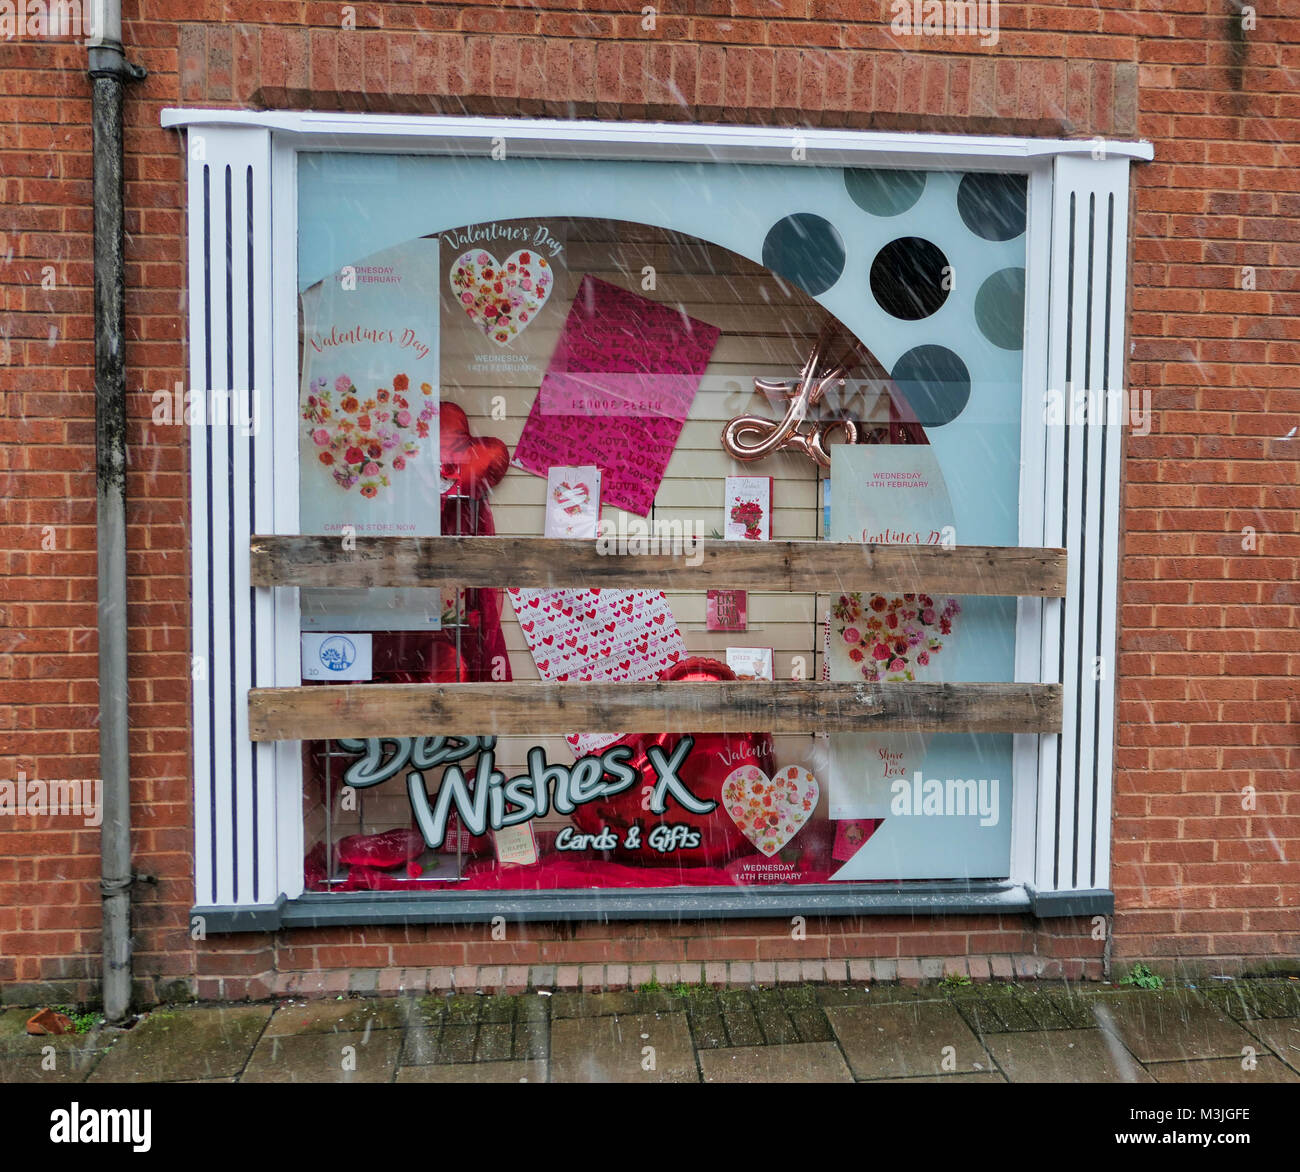 Ashbourne, UK. 11th February, 2018. All boarded up. Ashbourne town centre shop windows are boarded up for the start for the Ashbourne Royal Shrovetide Football match which takes place on Shrove Tuesday & Ash Wednesday every year.  game is the forerunner to football dating from 1683 when Charles Cotton's poem Burlesque upon the Great Frost, cousin of Aston Cockayne Baronet of Ashbourne, DerbyshirePreparations start for the Ashbourne Royal Shrovetide Football match which takes place on Shrove Tuesday & Ash Wednesday every year. Credit: Doug Blane/Alamy Live News Stock Photo